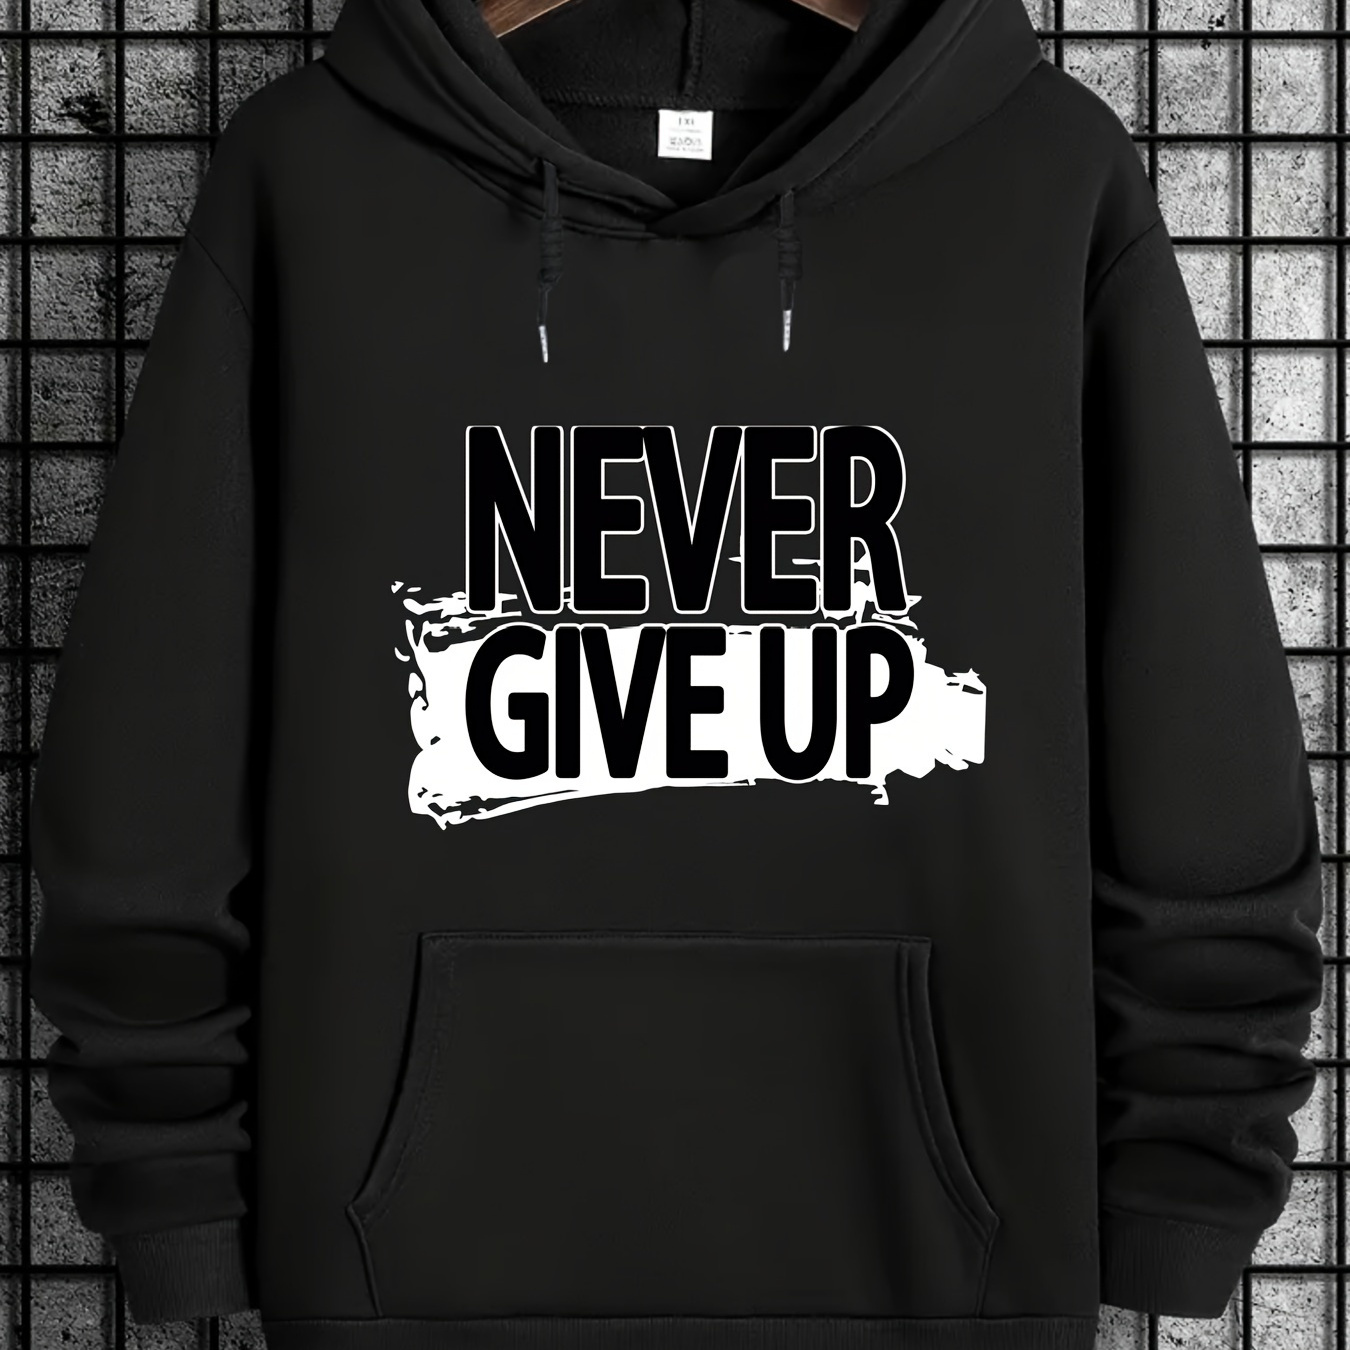 

Never Give Up Print Men's Pullover Round Neck Hoodies With Kangaroo Pocket & Drawstring Long Sleeve Hooded Sweatshirt Loose Casual Top For Autumn Winter Men's Clothing As Holiday Gifts